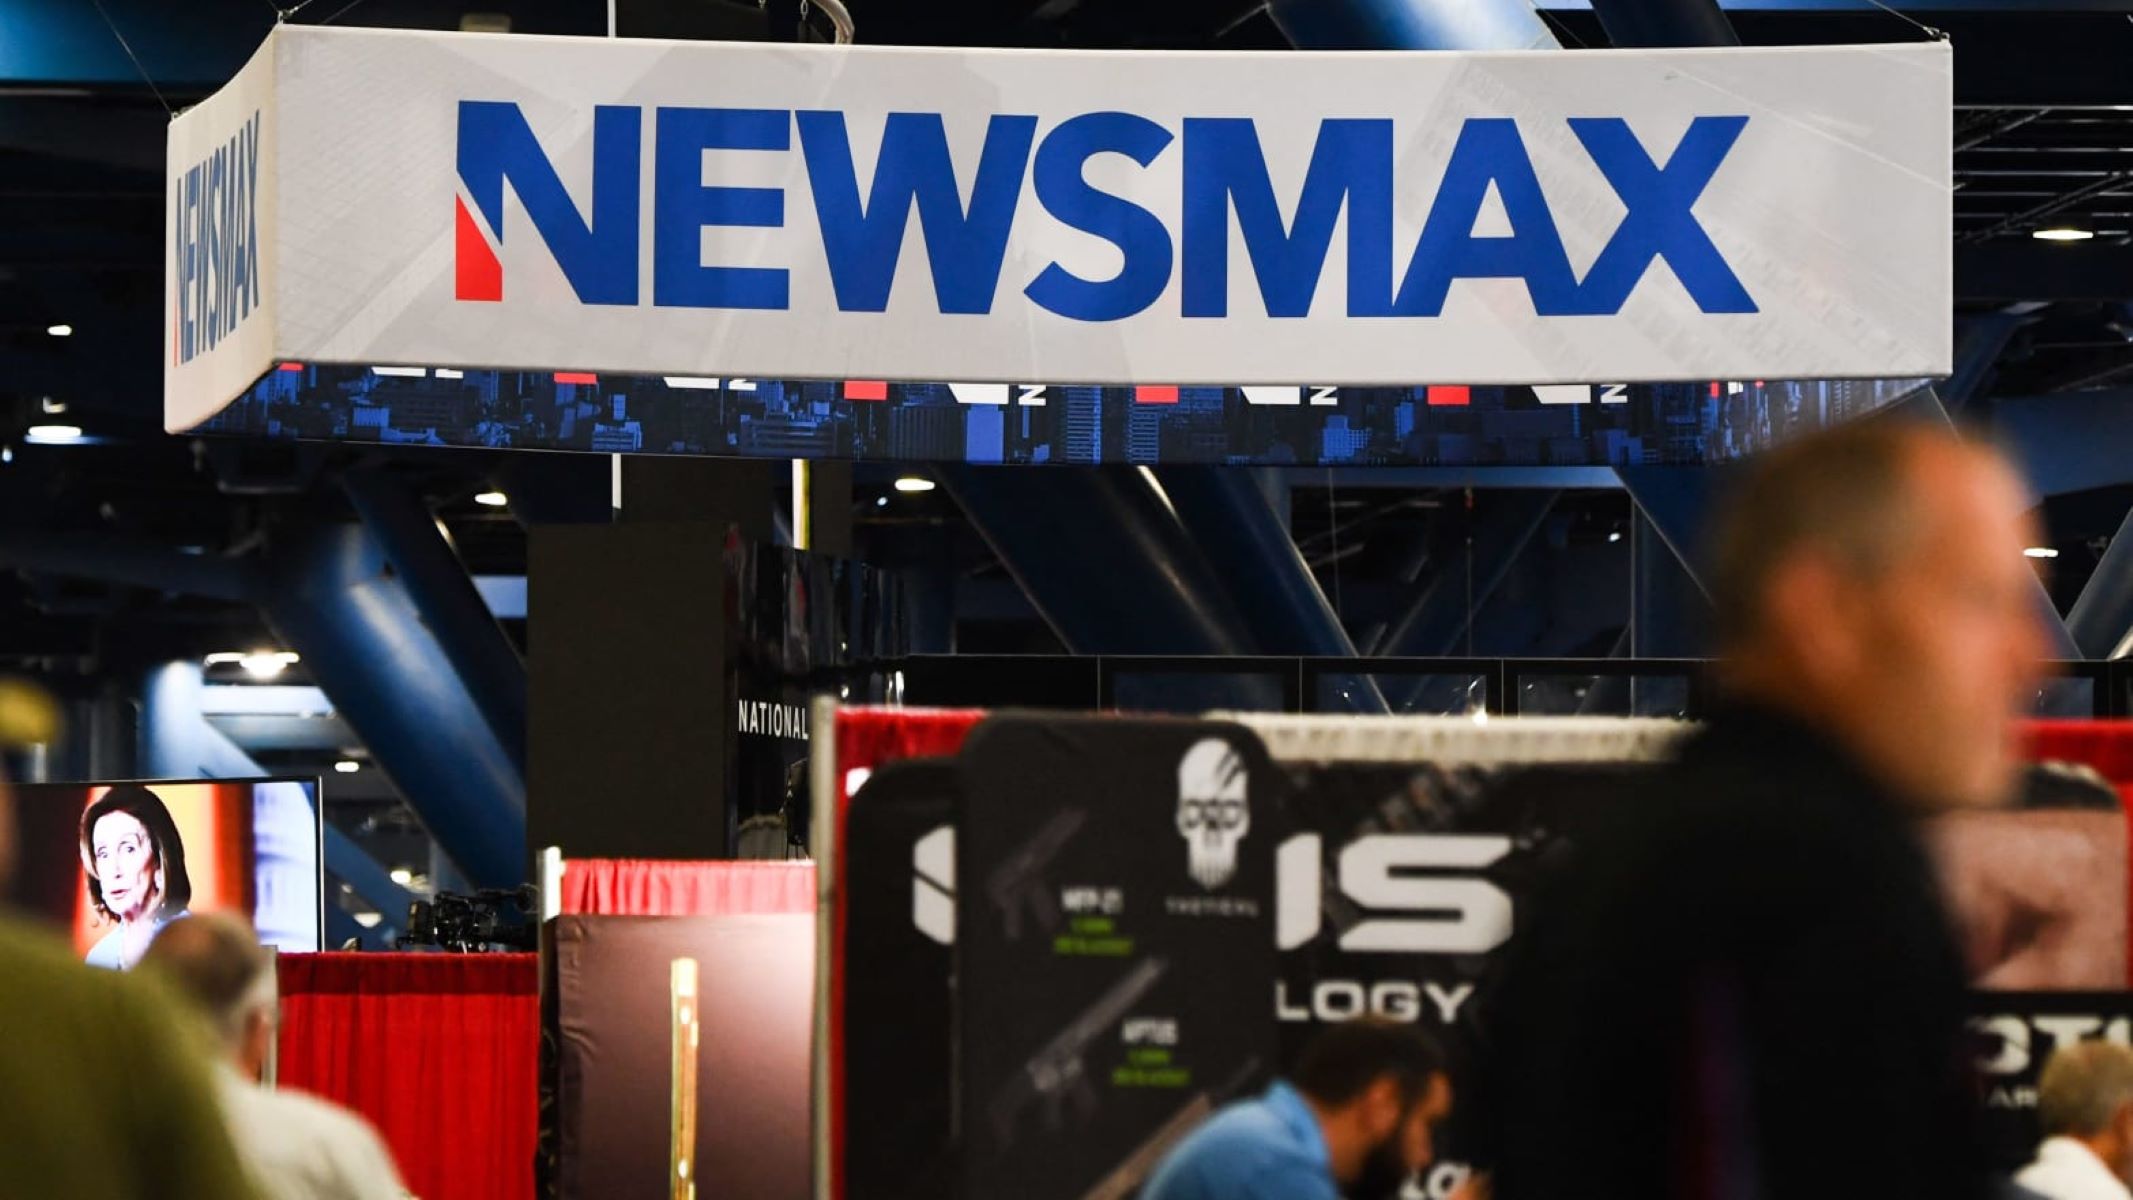 How To Watch Newsmax TV